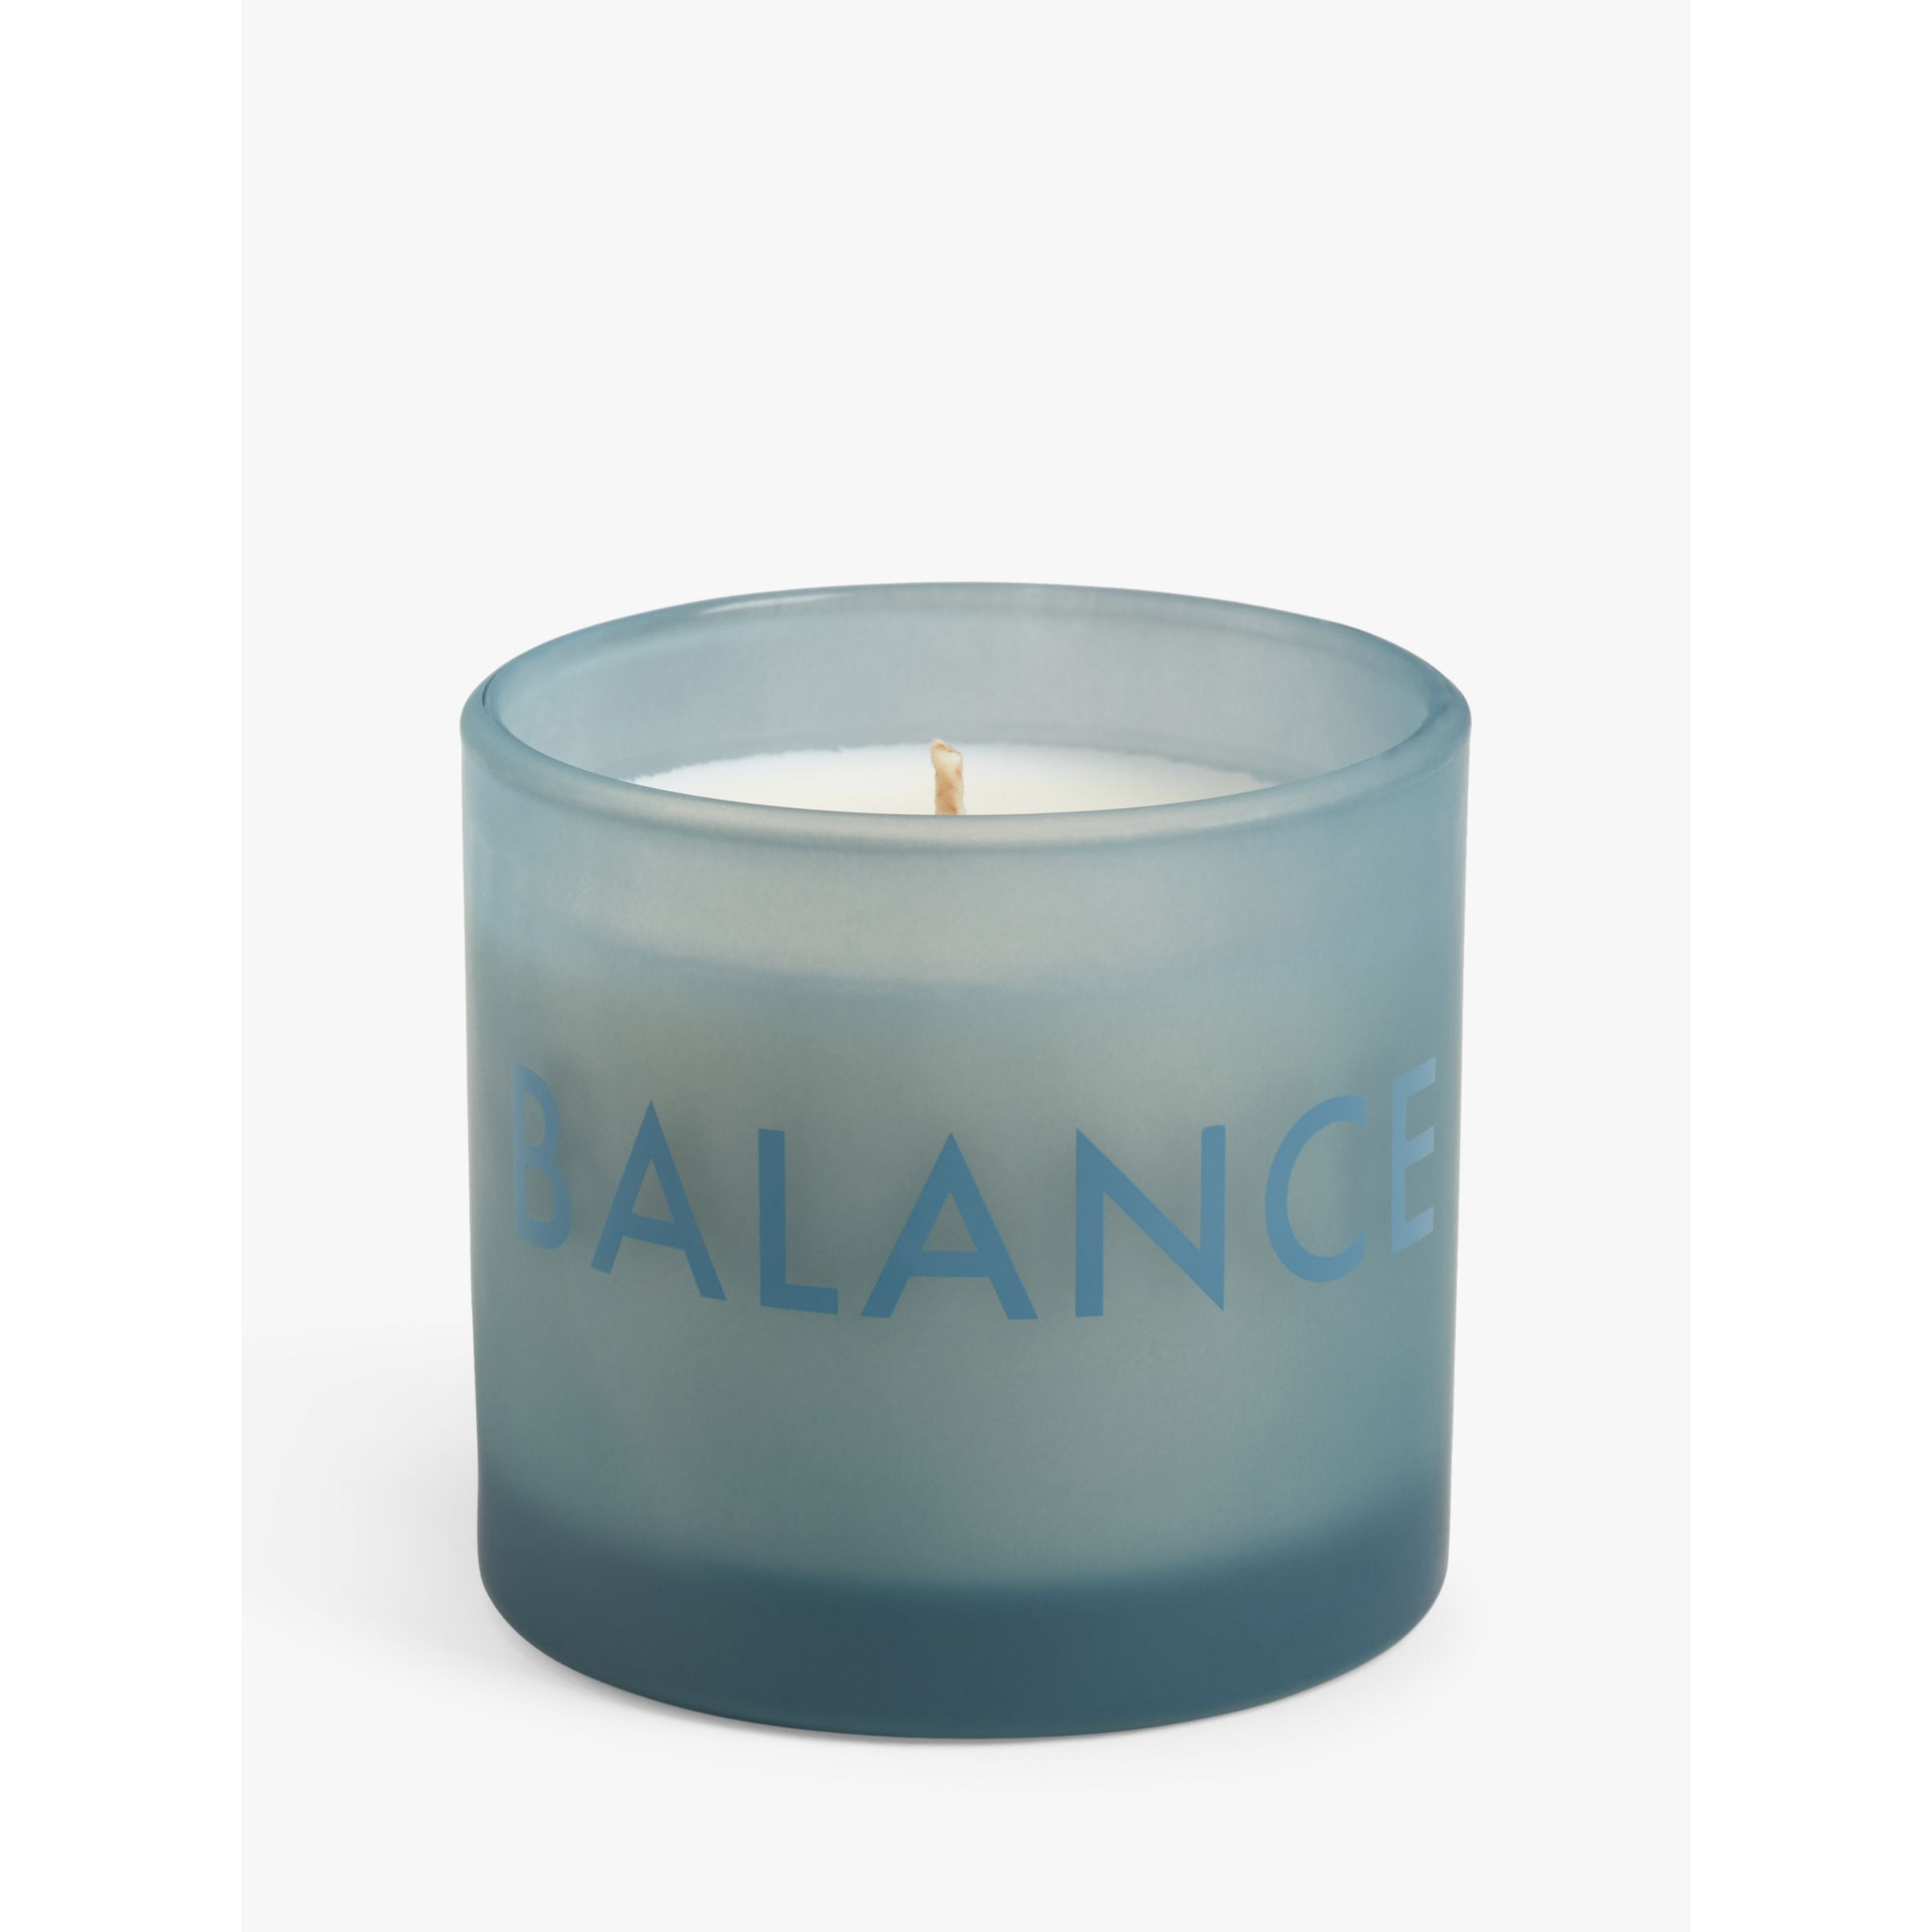 John Lewis Sentiments Balance Scented Candle, 115g - image 1